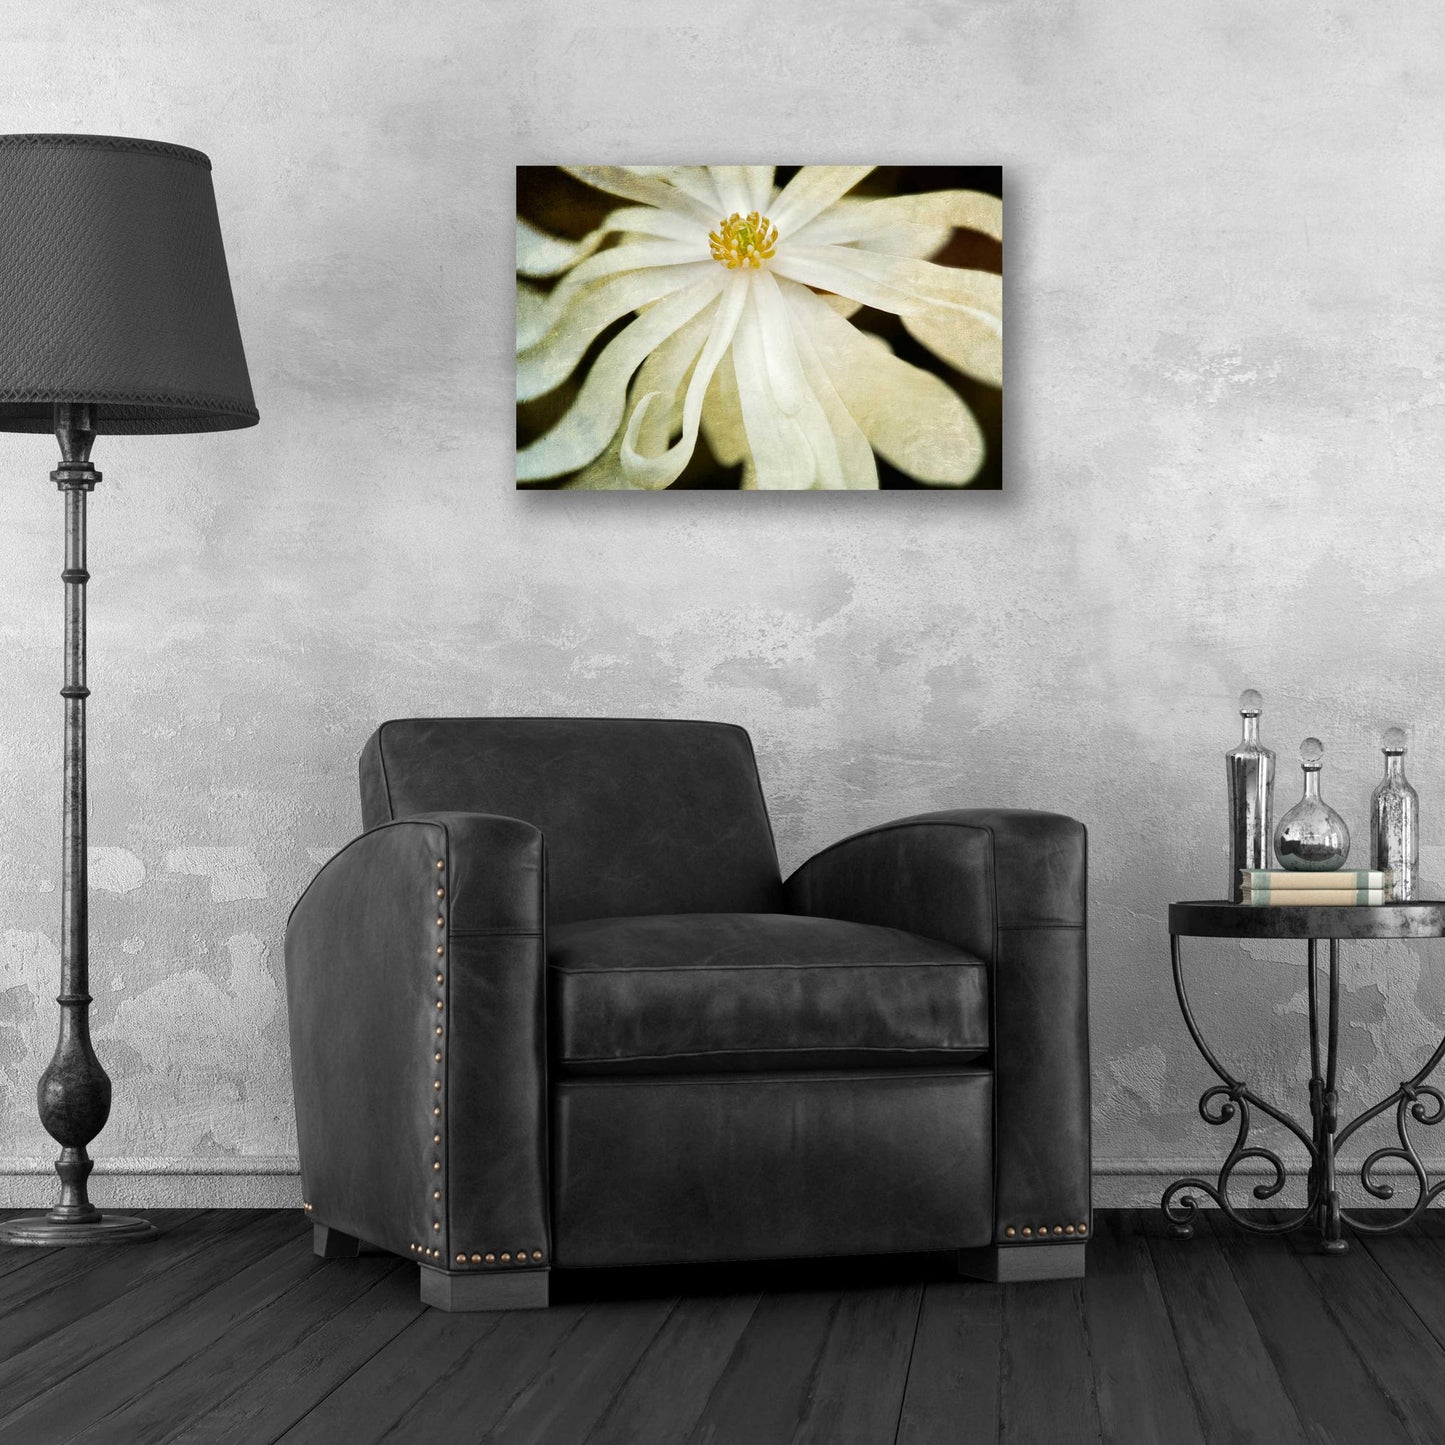 Epic Art 'White Flower' by Dennis Frates, Acrylic Glass Wall Art,24x16